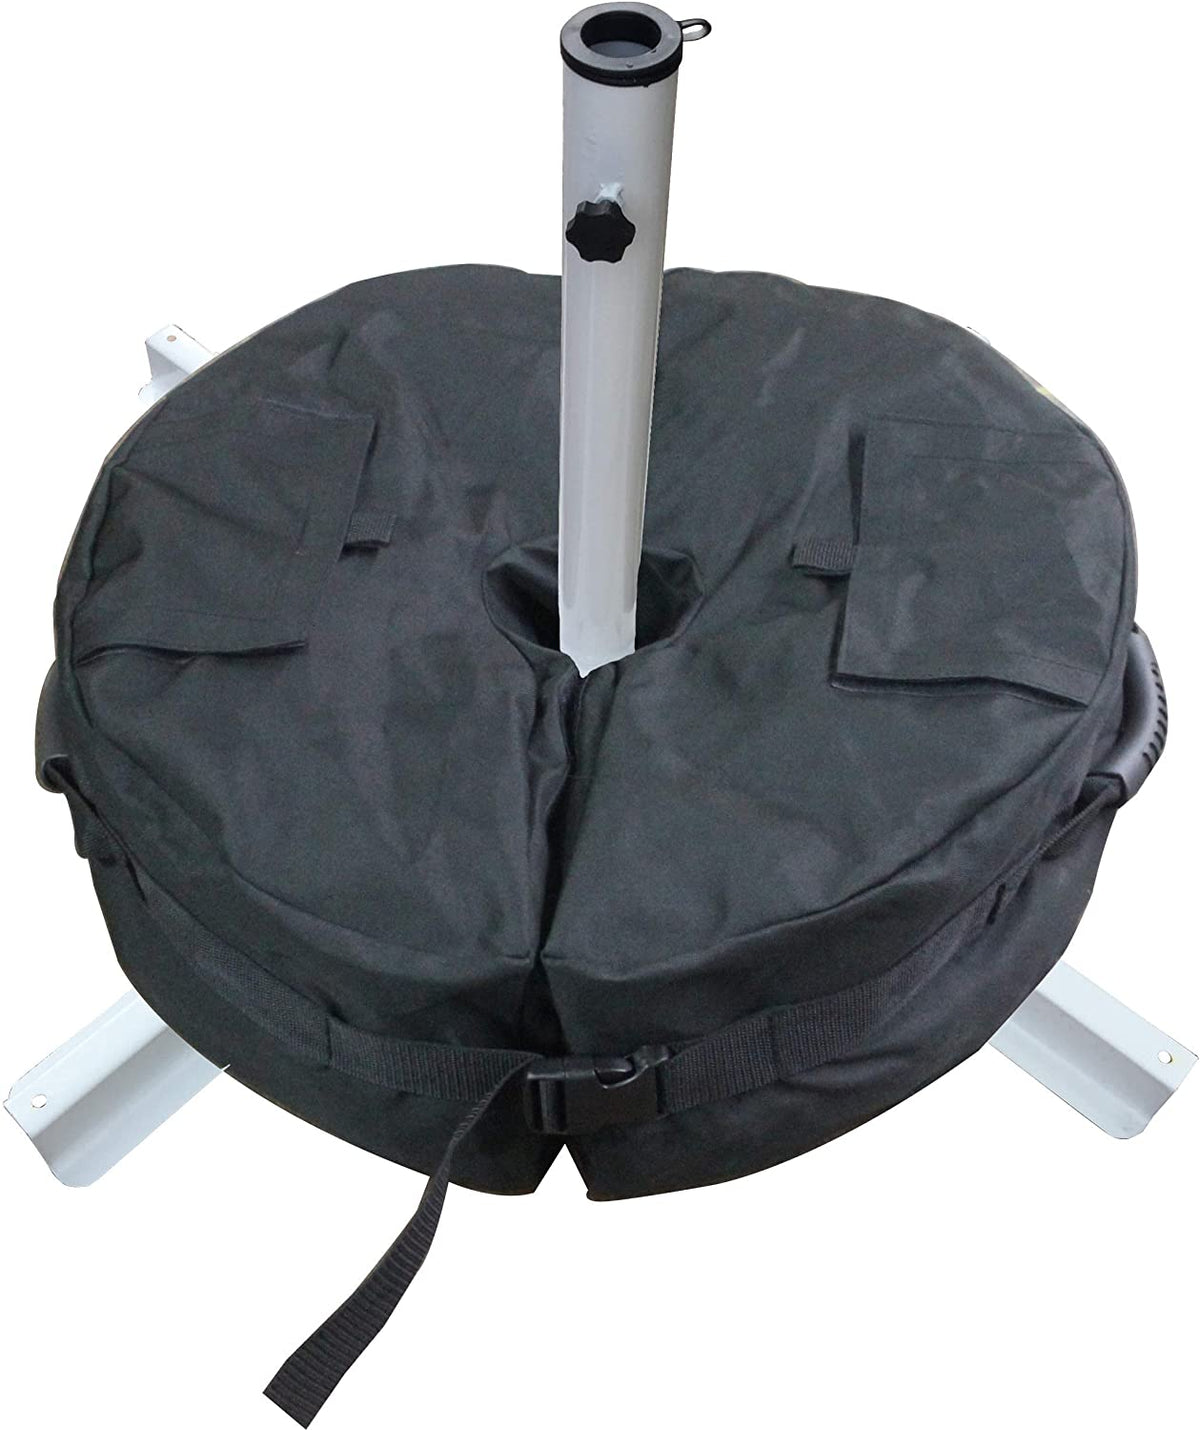 Umbrella Base Weight Bag for Patio Umbrellas Cantilever Offset Outdoor Parasol Holder Cover - Detatchable Heavy Duty Sand Fillable Bag Anchor with Big Opening &amp; Strong Handles for Garden &amp; Beach